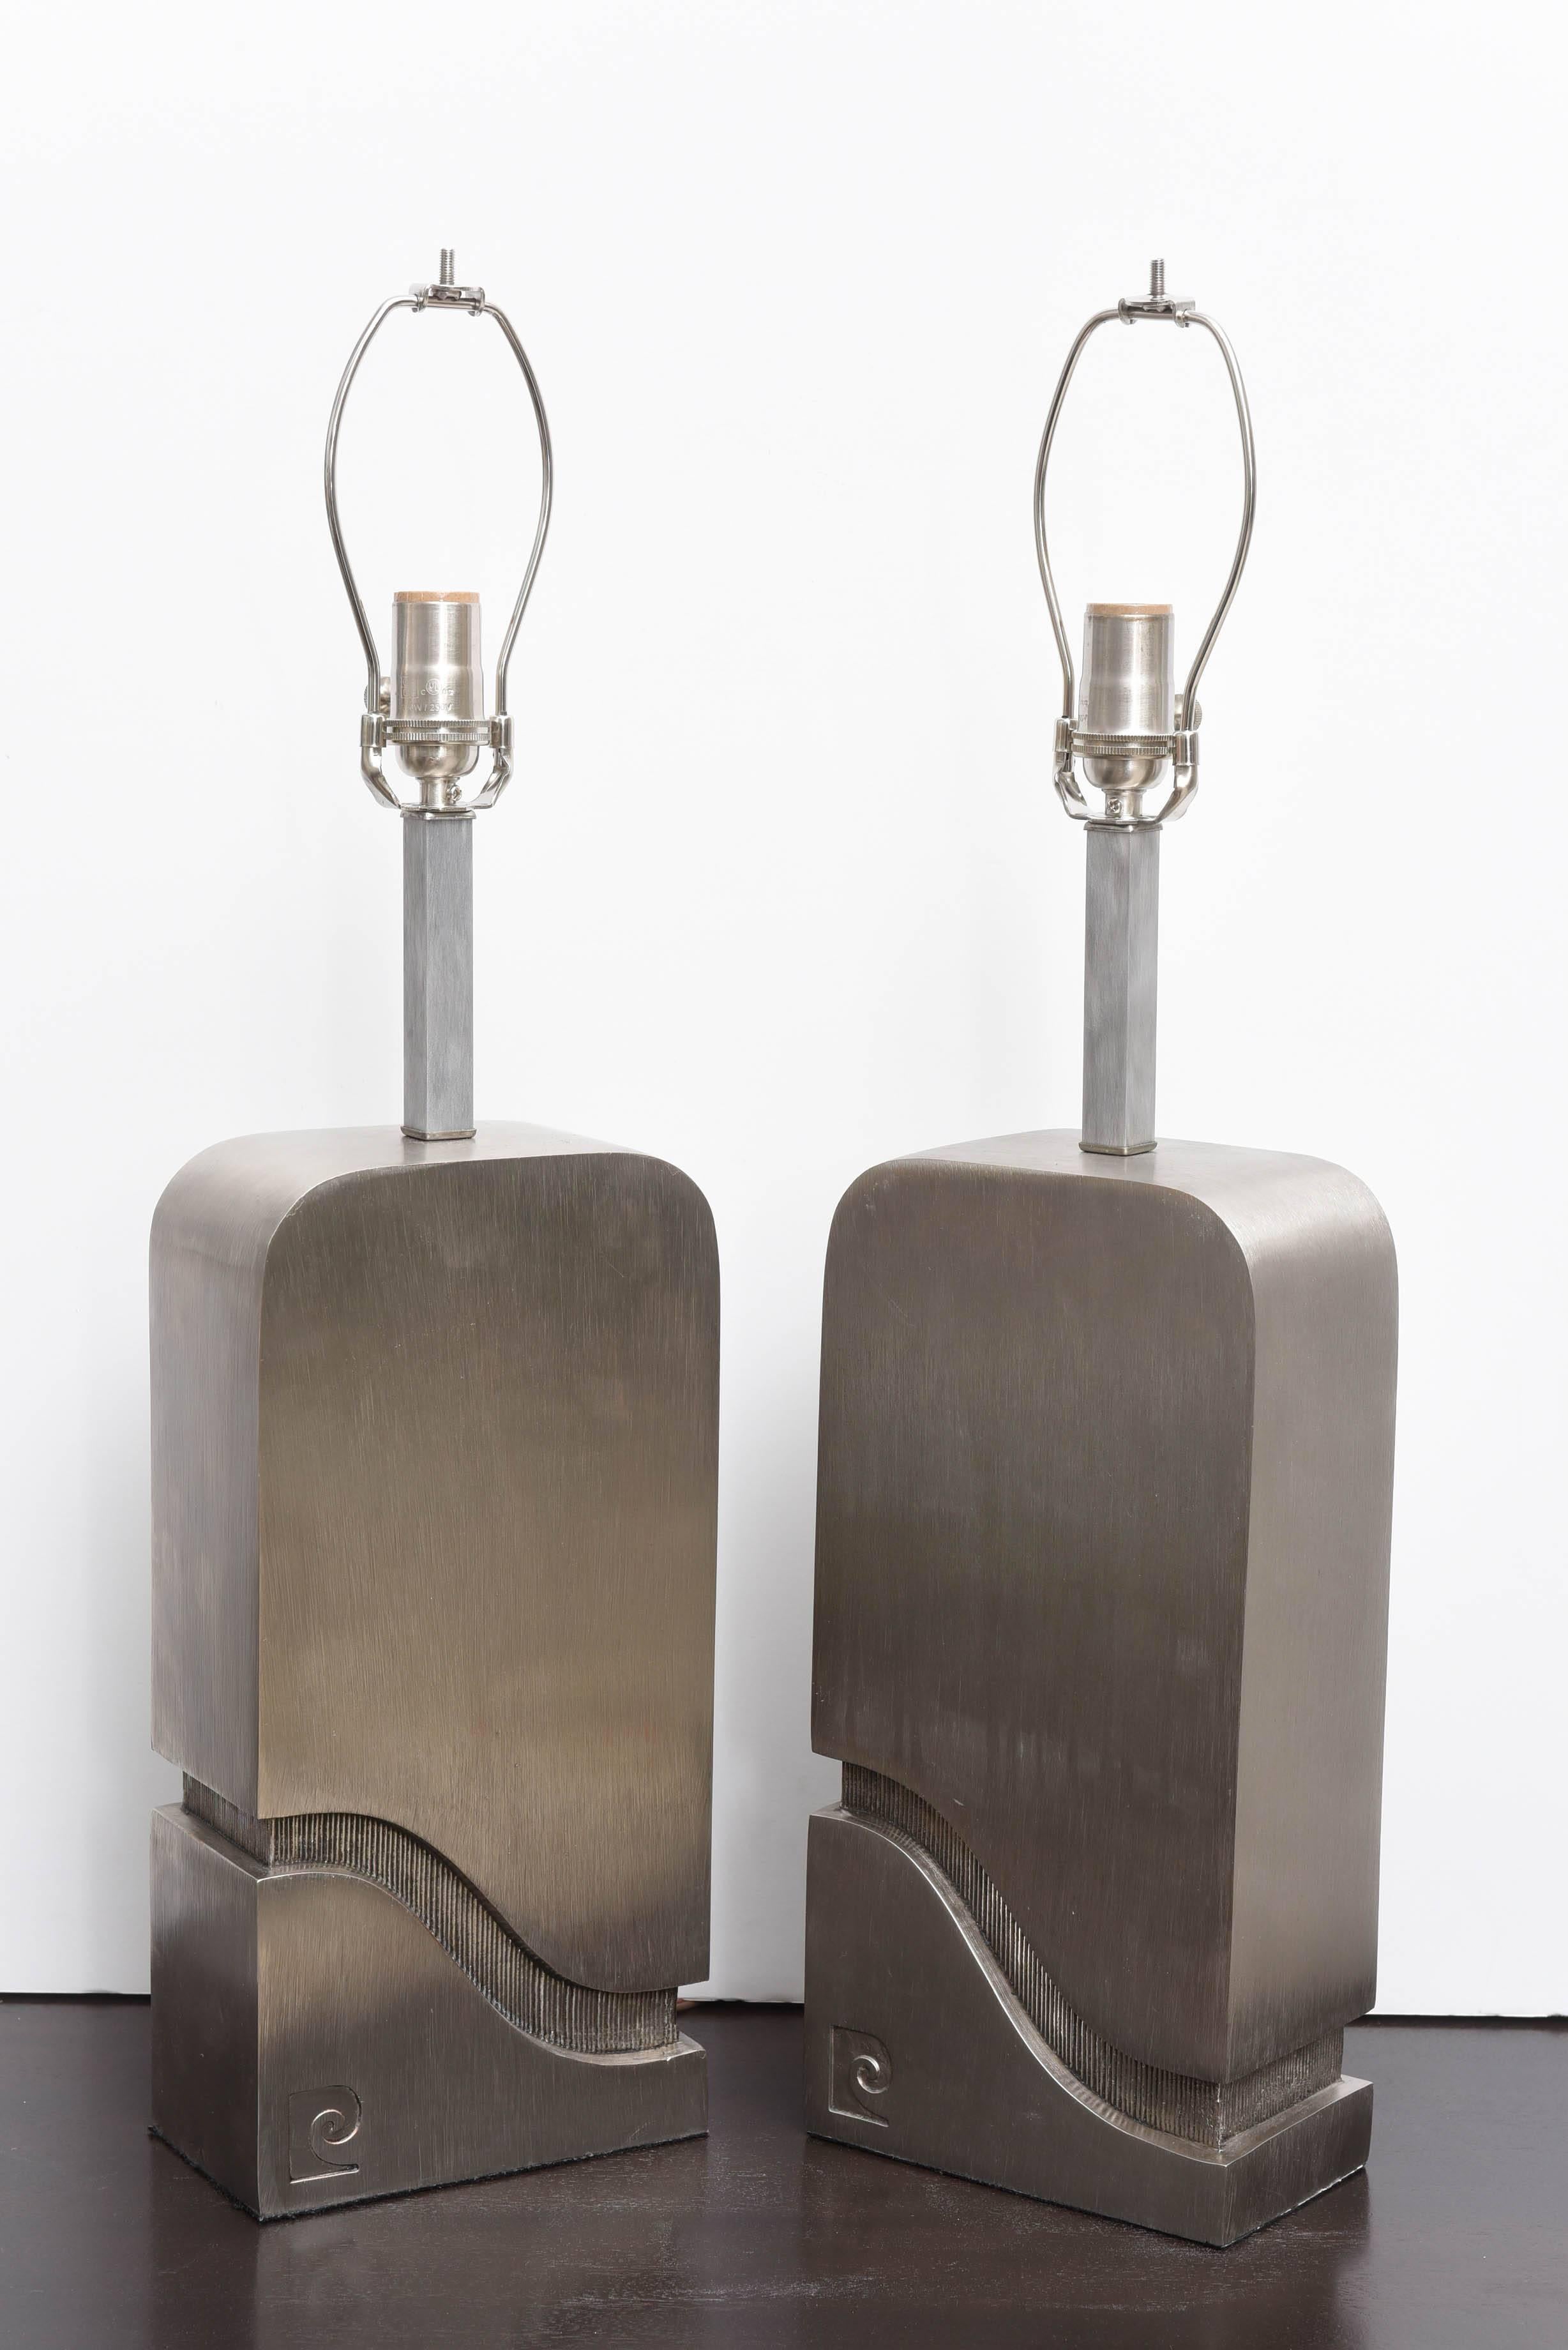 Pair of brushed steel Pierre Cardin table lamps.
The lamps bear the iconic logo located in lower left corners. The single socket accommodates traditional bulb.
 